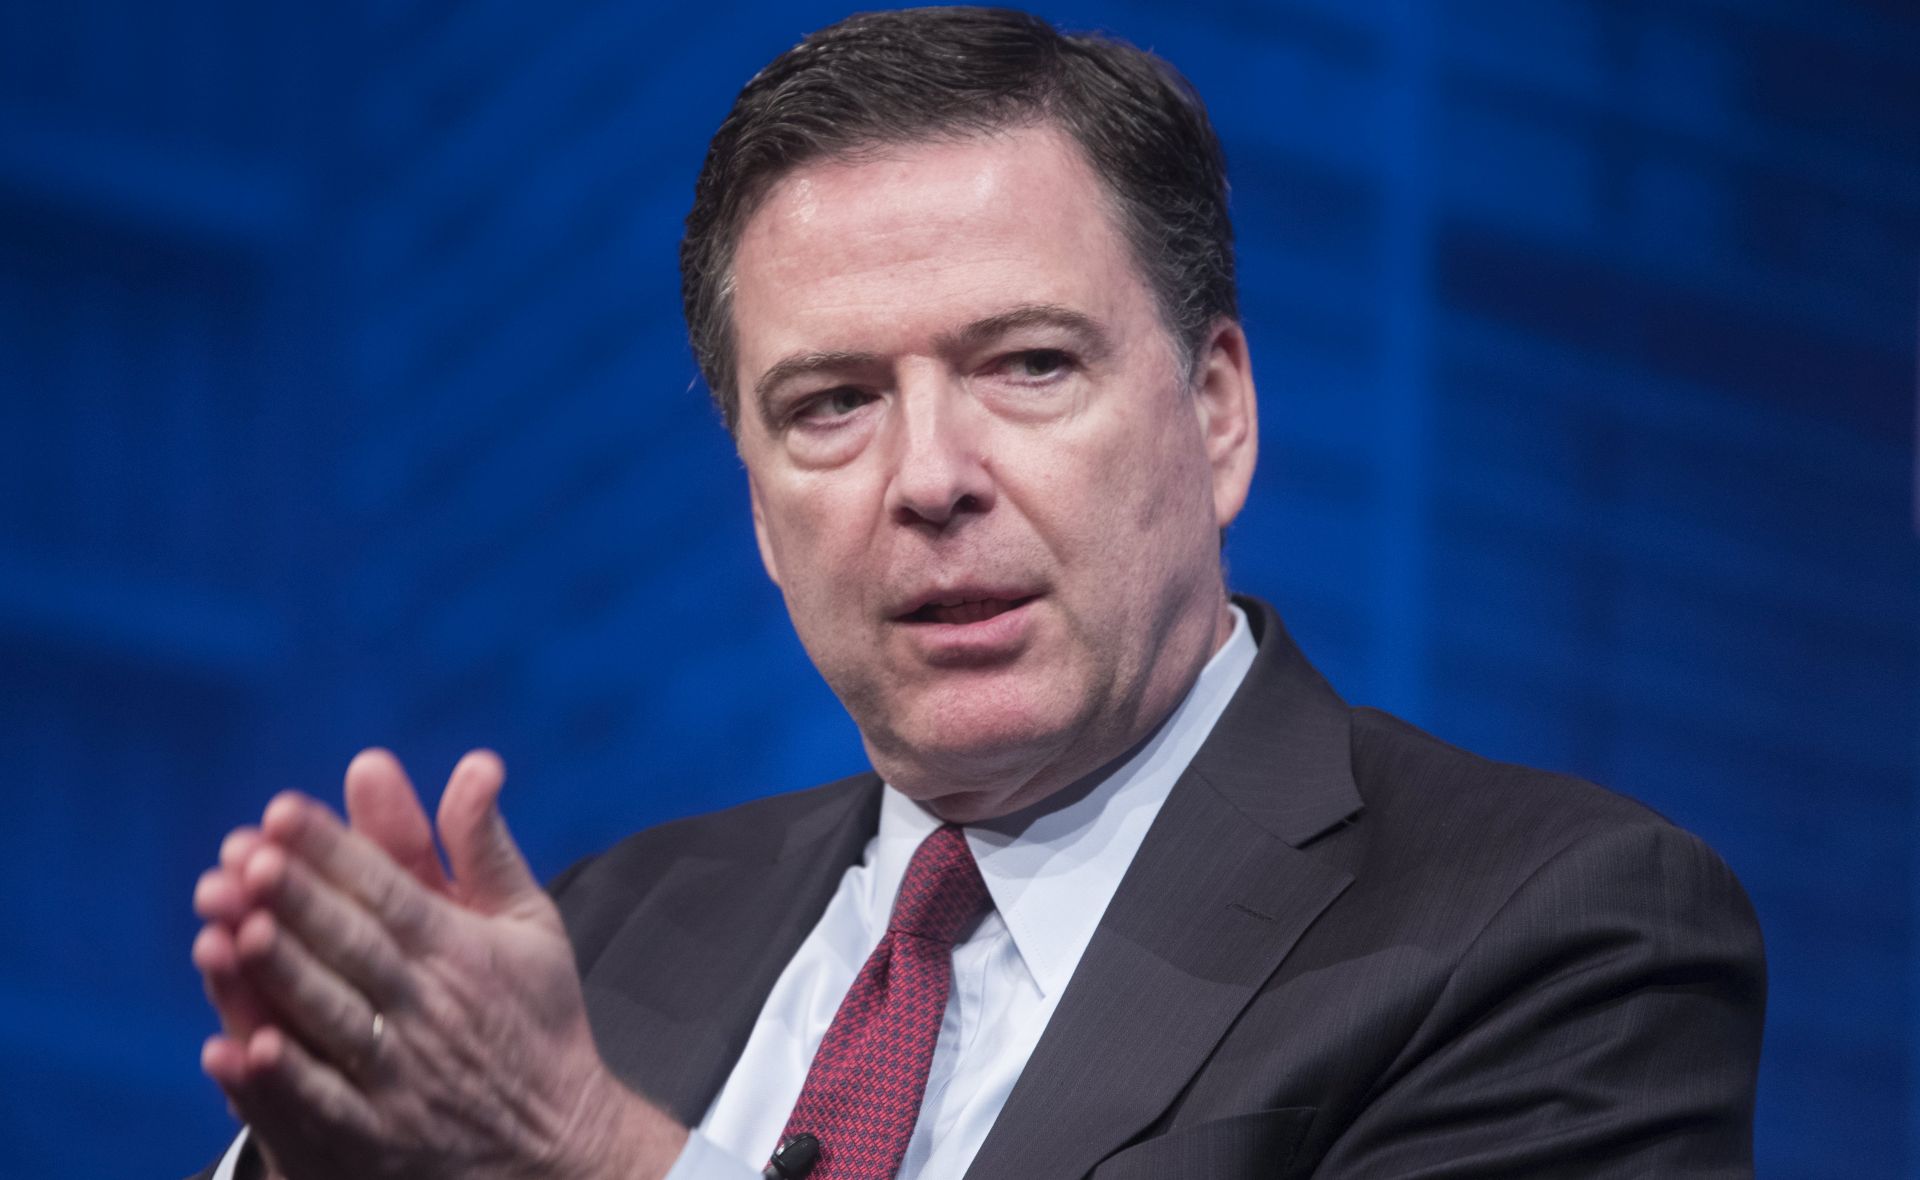 epa05905276 Director of the Federal Bureau of Investigation (FBI) James Comey participates in a panel discussion at the premiere screening of the television show, 'Inside the FBI - New York', at the Newseum in Washington, DC, USA, 12 April 2017.  EPA/MICHAEL REYNOLDS